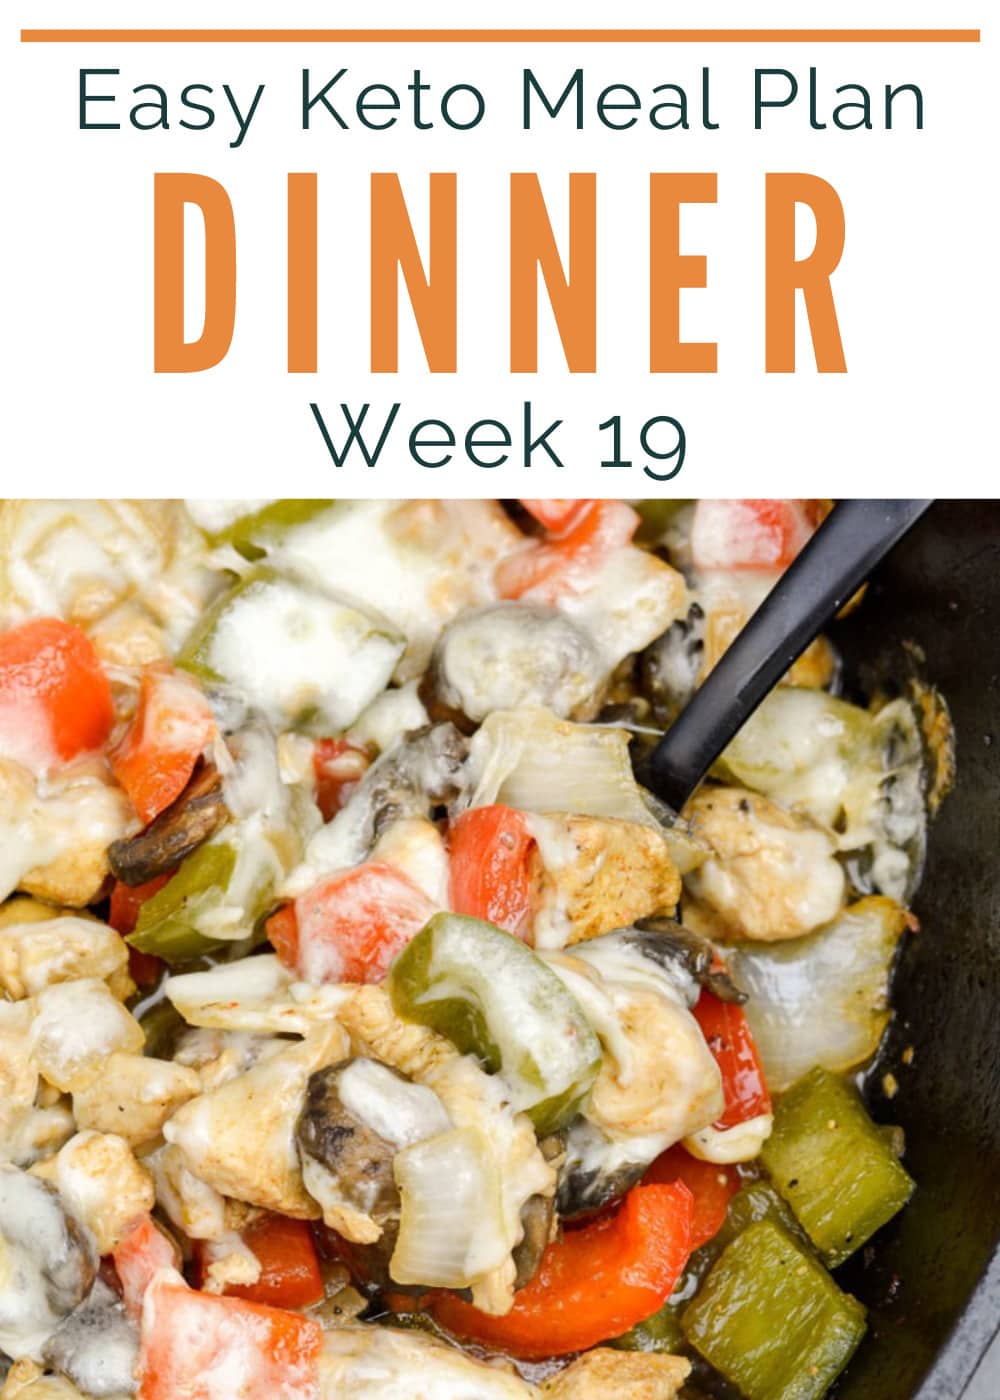 Week 19 Easy Keto Meal Plan includes 5 easy keto dinners plus a low-carb dessert! This guide is complete with net carb counts, serving amounts, and a printable shopping list.